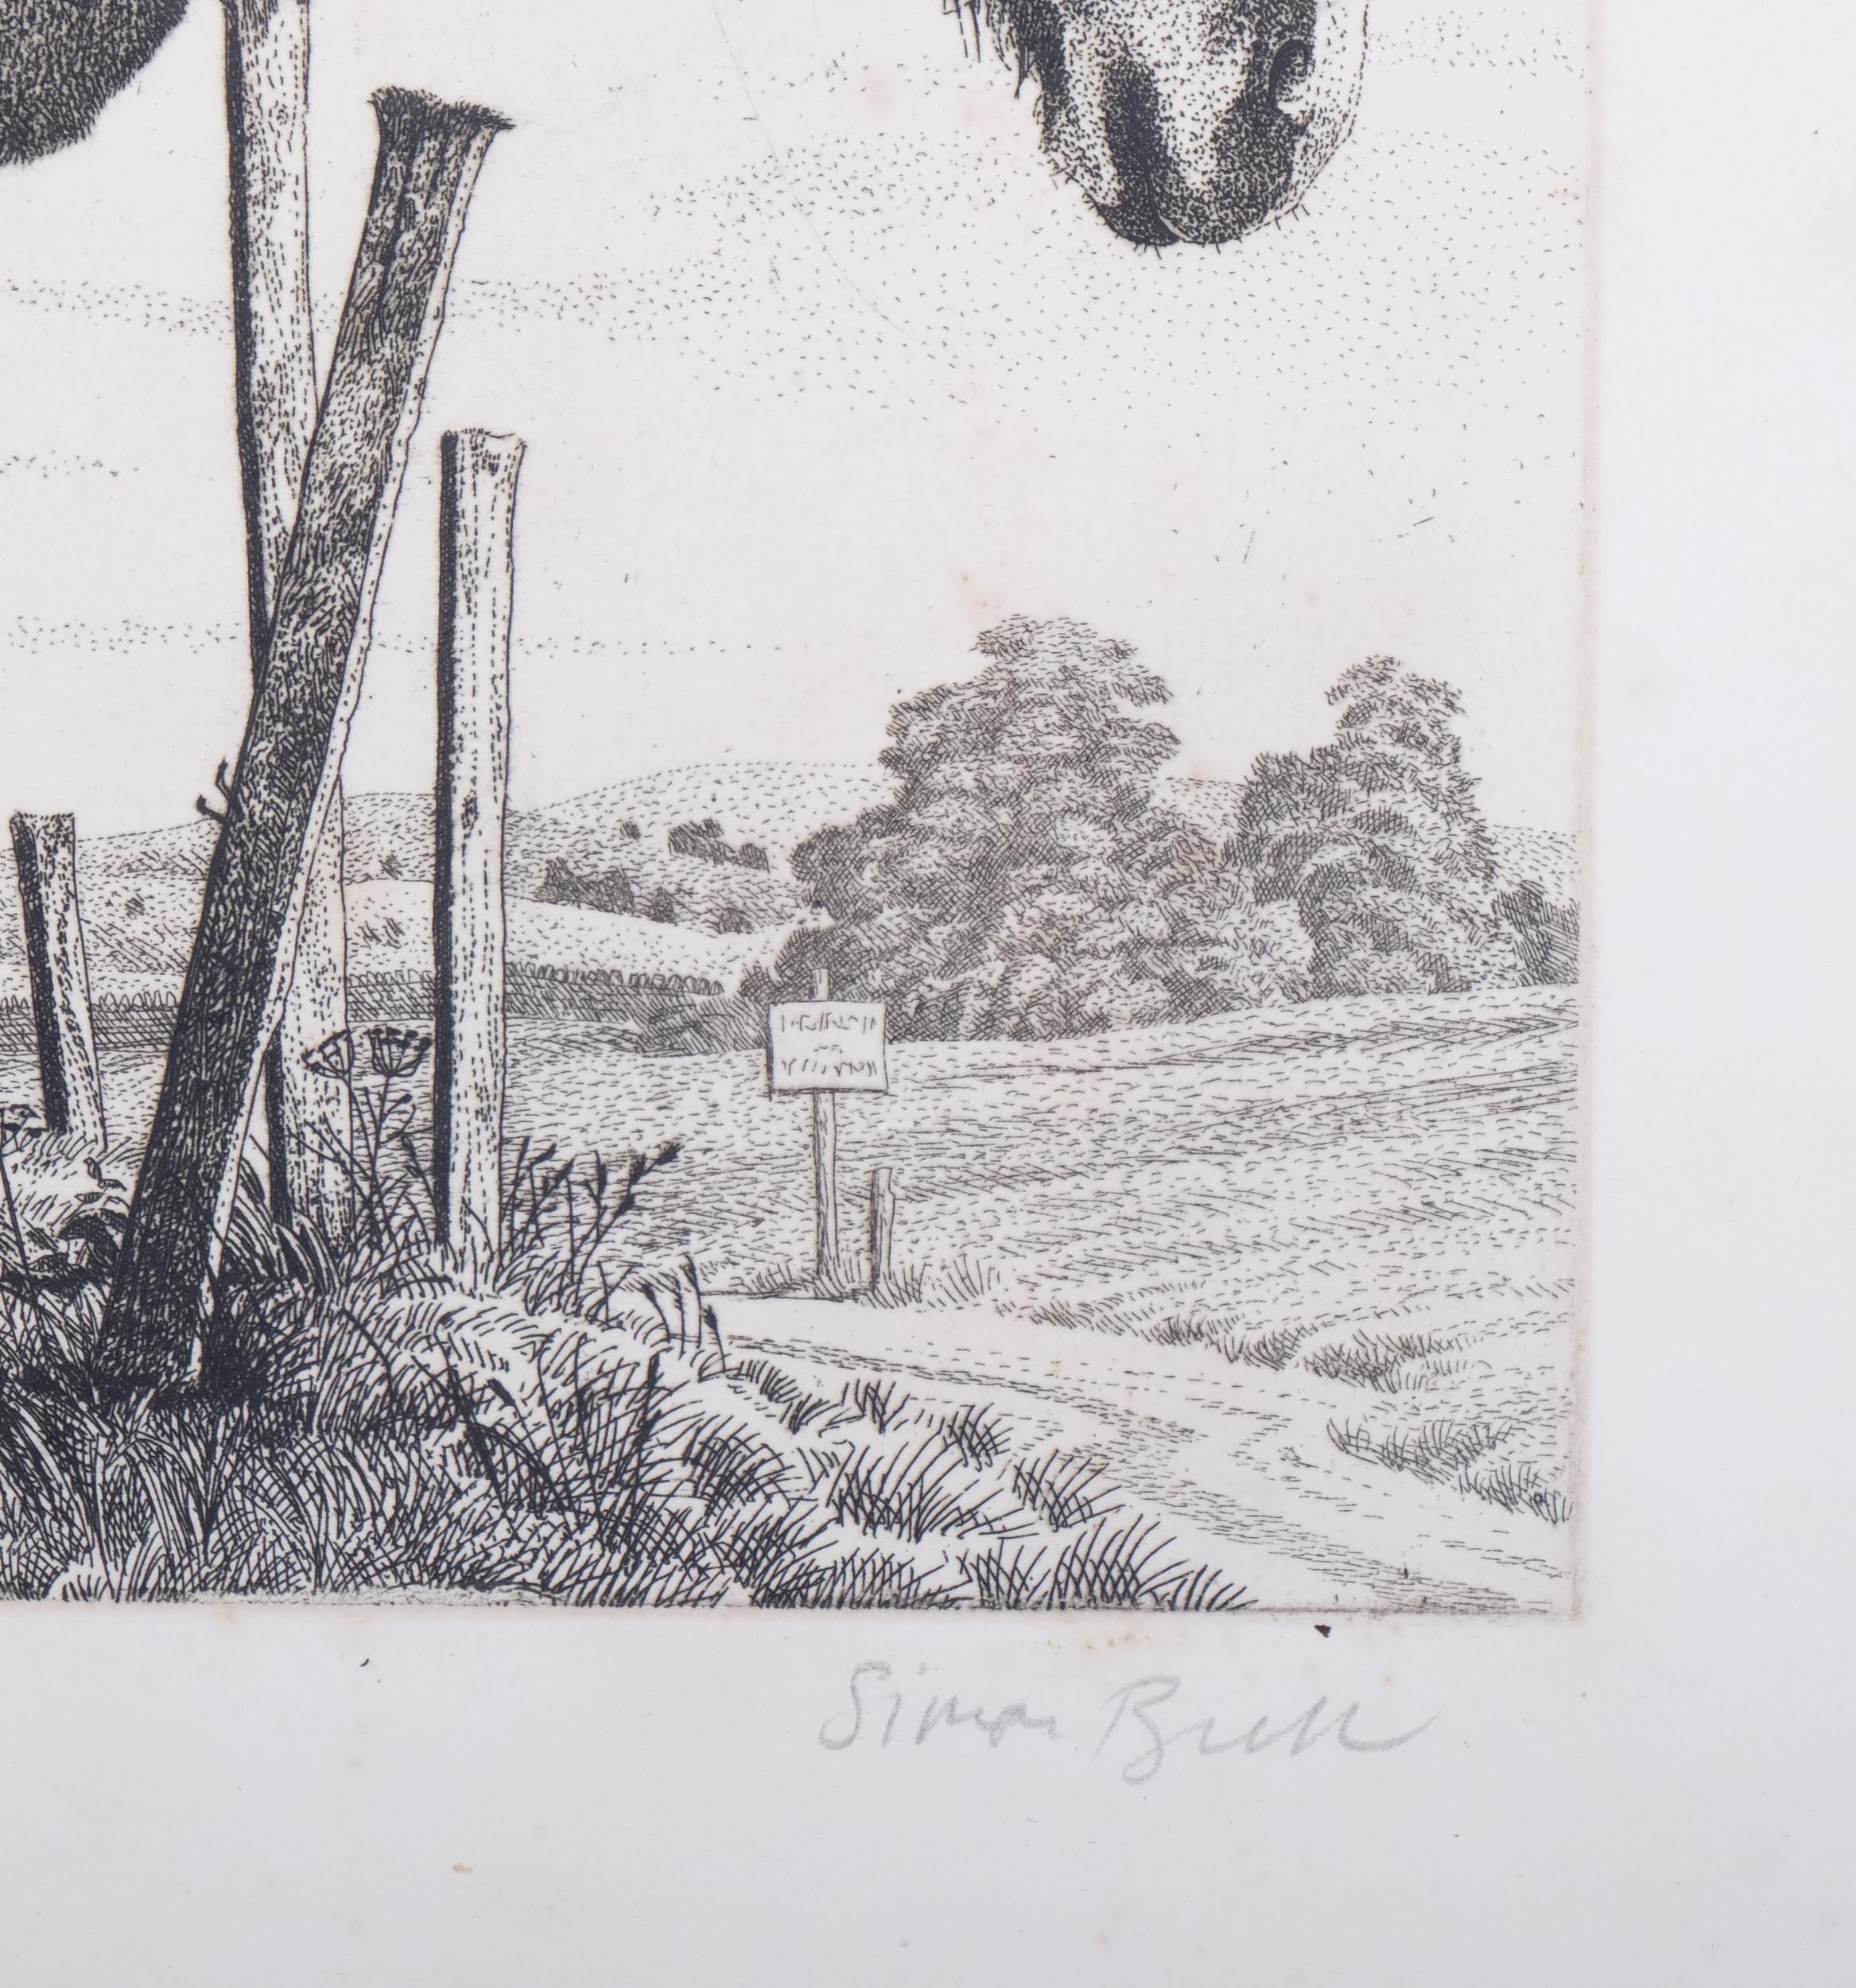 Simon Bull (1958), limited edition etching on paper, The Old Horse, signed and titled in pencil, Ed. - Image 3 of 4